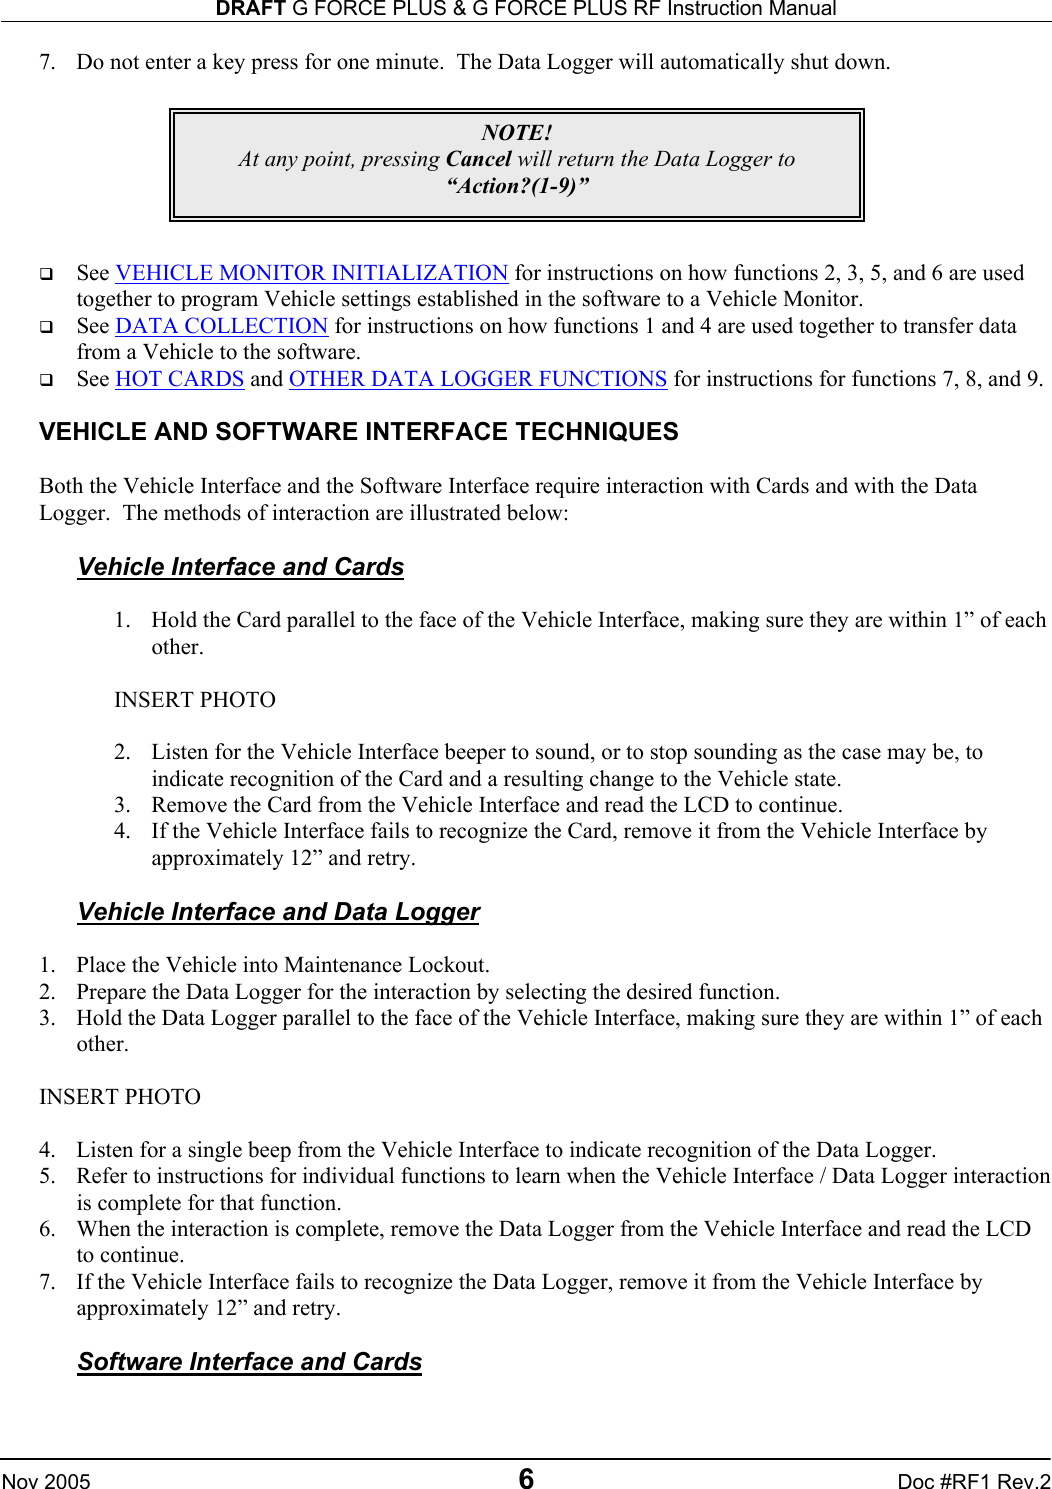 DRAFT G FORCE PLUS &amp; G FORCE PLUS RF Instruction Manual   Nov 2005 6 Doc #RF1 Rev.2 7.  Do not enter a key press for one minute.  The Data Logger will automatically shut down.          See VEHICLE MONITOR INITIALIZATION for instructions on how functions 2, 3, 5, and 6 are used together to program Vehicle settings established in the software to a Vehicle Monitor.   See DATA COLLECTION for instructions on how functions 1 and 4 are used together to transfer data from a Vehicle to the software.   See HOT CARDS and OTHER DATA LOGGER FUNCTIONS for instructions for functions 7, 8, and 9.  VEHICLE AND SOFTWARE INTERFACE TECHNIQUES  Both the Vehicle Interface and the Software Interface require interaction with Cards and with the Data Logger.  The methods of interaction are illustrated below:  Vehicle Interface and Cards  1.  Hold the Card parallel to the face of the Vehicle Interface, making sure they are within 1” of each other.  INSERT PHOTO  2.  Listen for the Vehicle Interface beeper to sound, or to stop sounding as the case may be, to indicate recognition of the Card and a resulting change to the Vehicle state. 3.  Remove the Card from the Vehicle Interface and read the LCD to continue. 4.  If the Vehicle Interface fails to recognize the Card, remove it from the Vehicle Interface by approximately 12” and retry.  Vehicle Interface and Data Logger  1.  Place the Vehicle into Maintenance Lockout. 2.  Prepare the Data Logger for the interaction by selecting the desired function. 3.  Hold the Data Logger parallel to the face of the Vehicle Interface, making sure they are within 1” of each other.    INSERT PHOTO  4.  Listen for a single beep from the Vehicle Interface to indicate recognition of the Data Logger. 5.  Refer to instructions for individual functions to learn when the Vehicle Interface / Data Logger interaction is complete for that function. 6.  When the interaction is complete, remove the Data Logger from the Vehicle Interface and read the LCD to continue. 7.  If the Vehicle Interface fails to recognize the Data Logger, remove it from the Vehicle Interface by approximately 12” and retry.  Software Interface and Cards  NOTE! At any point, pressing Cancel will return the Data Logger to “Action?(1-9)”  